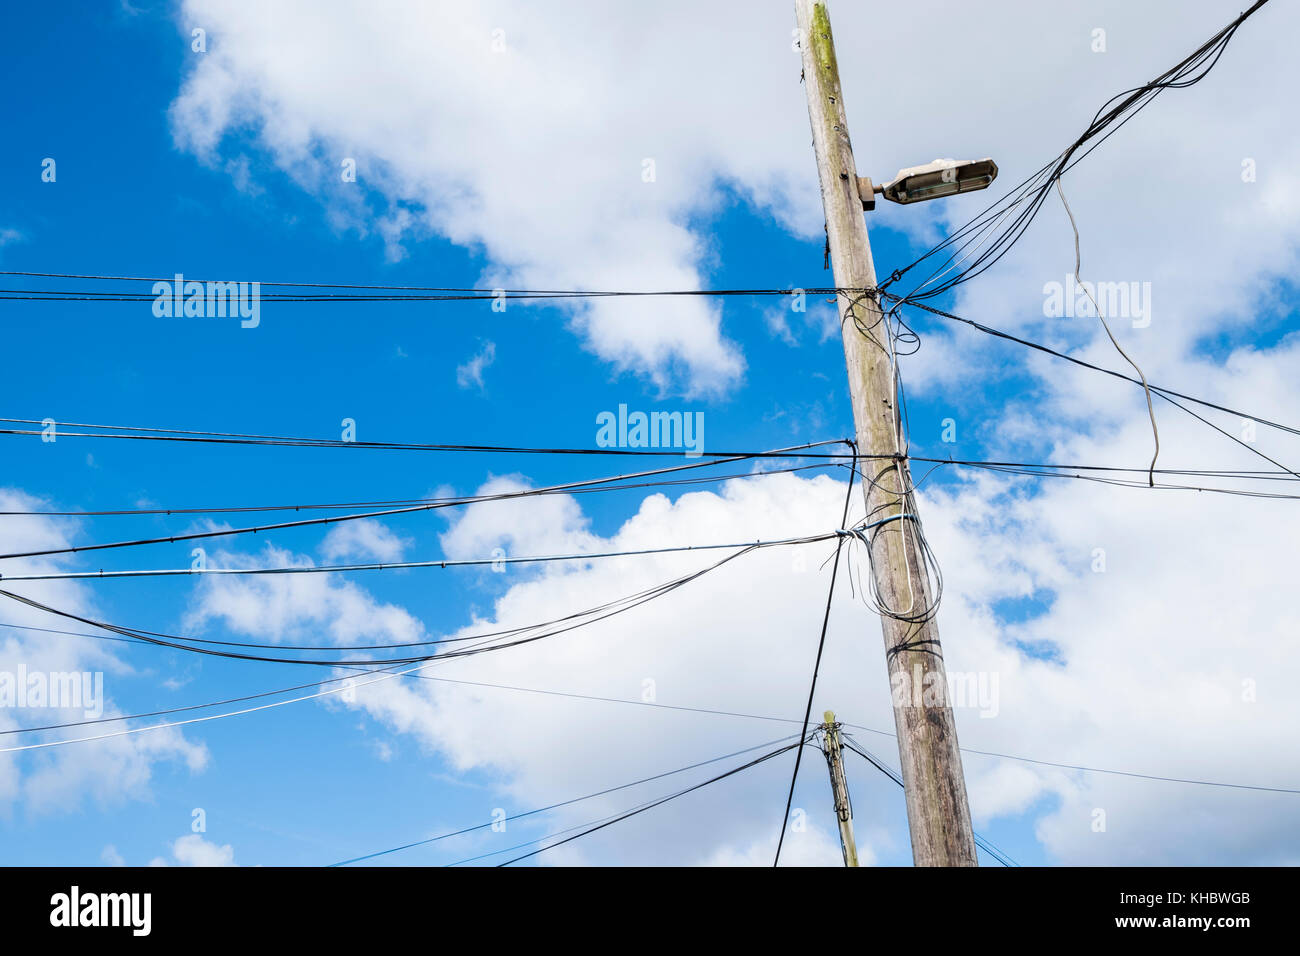 Many electricity power cables on a wooden utility pole with a light, Nottingham, England, UK Stock Photo